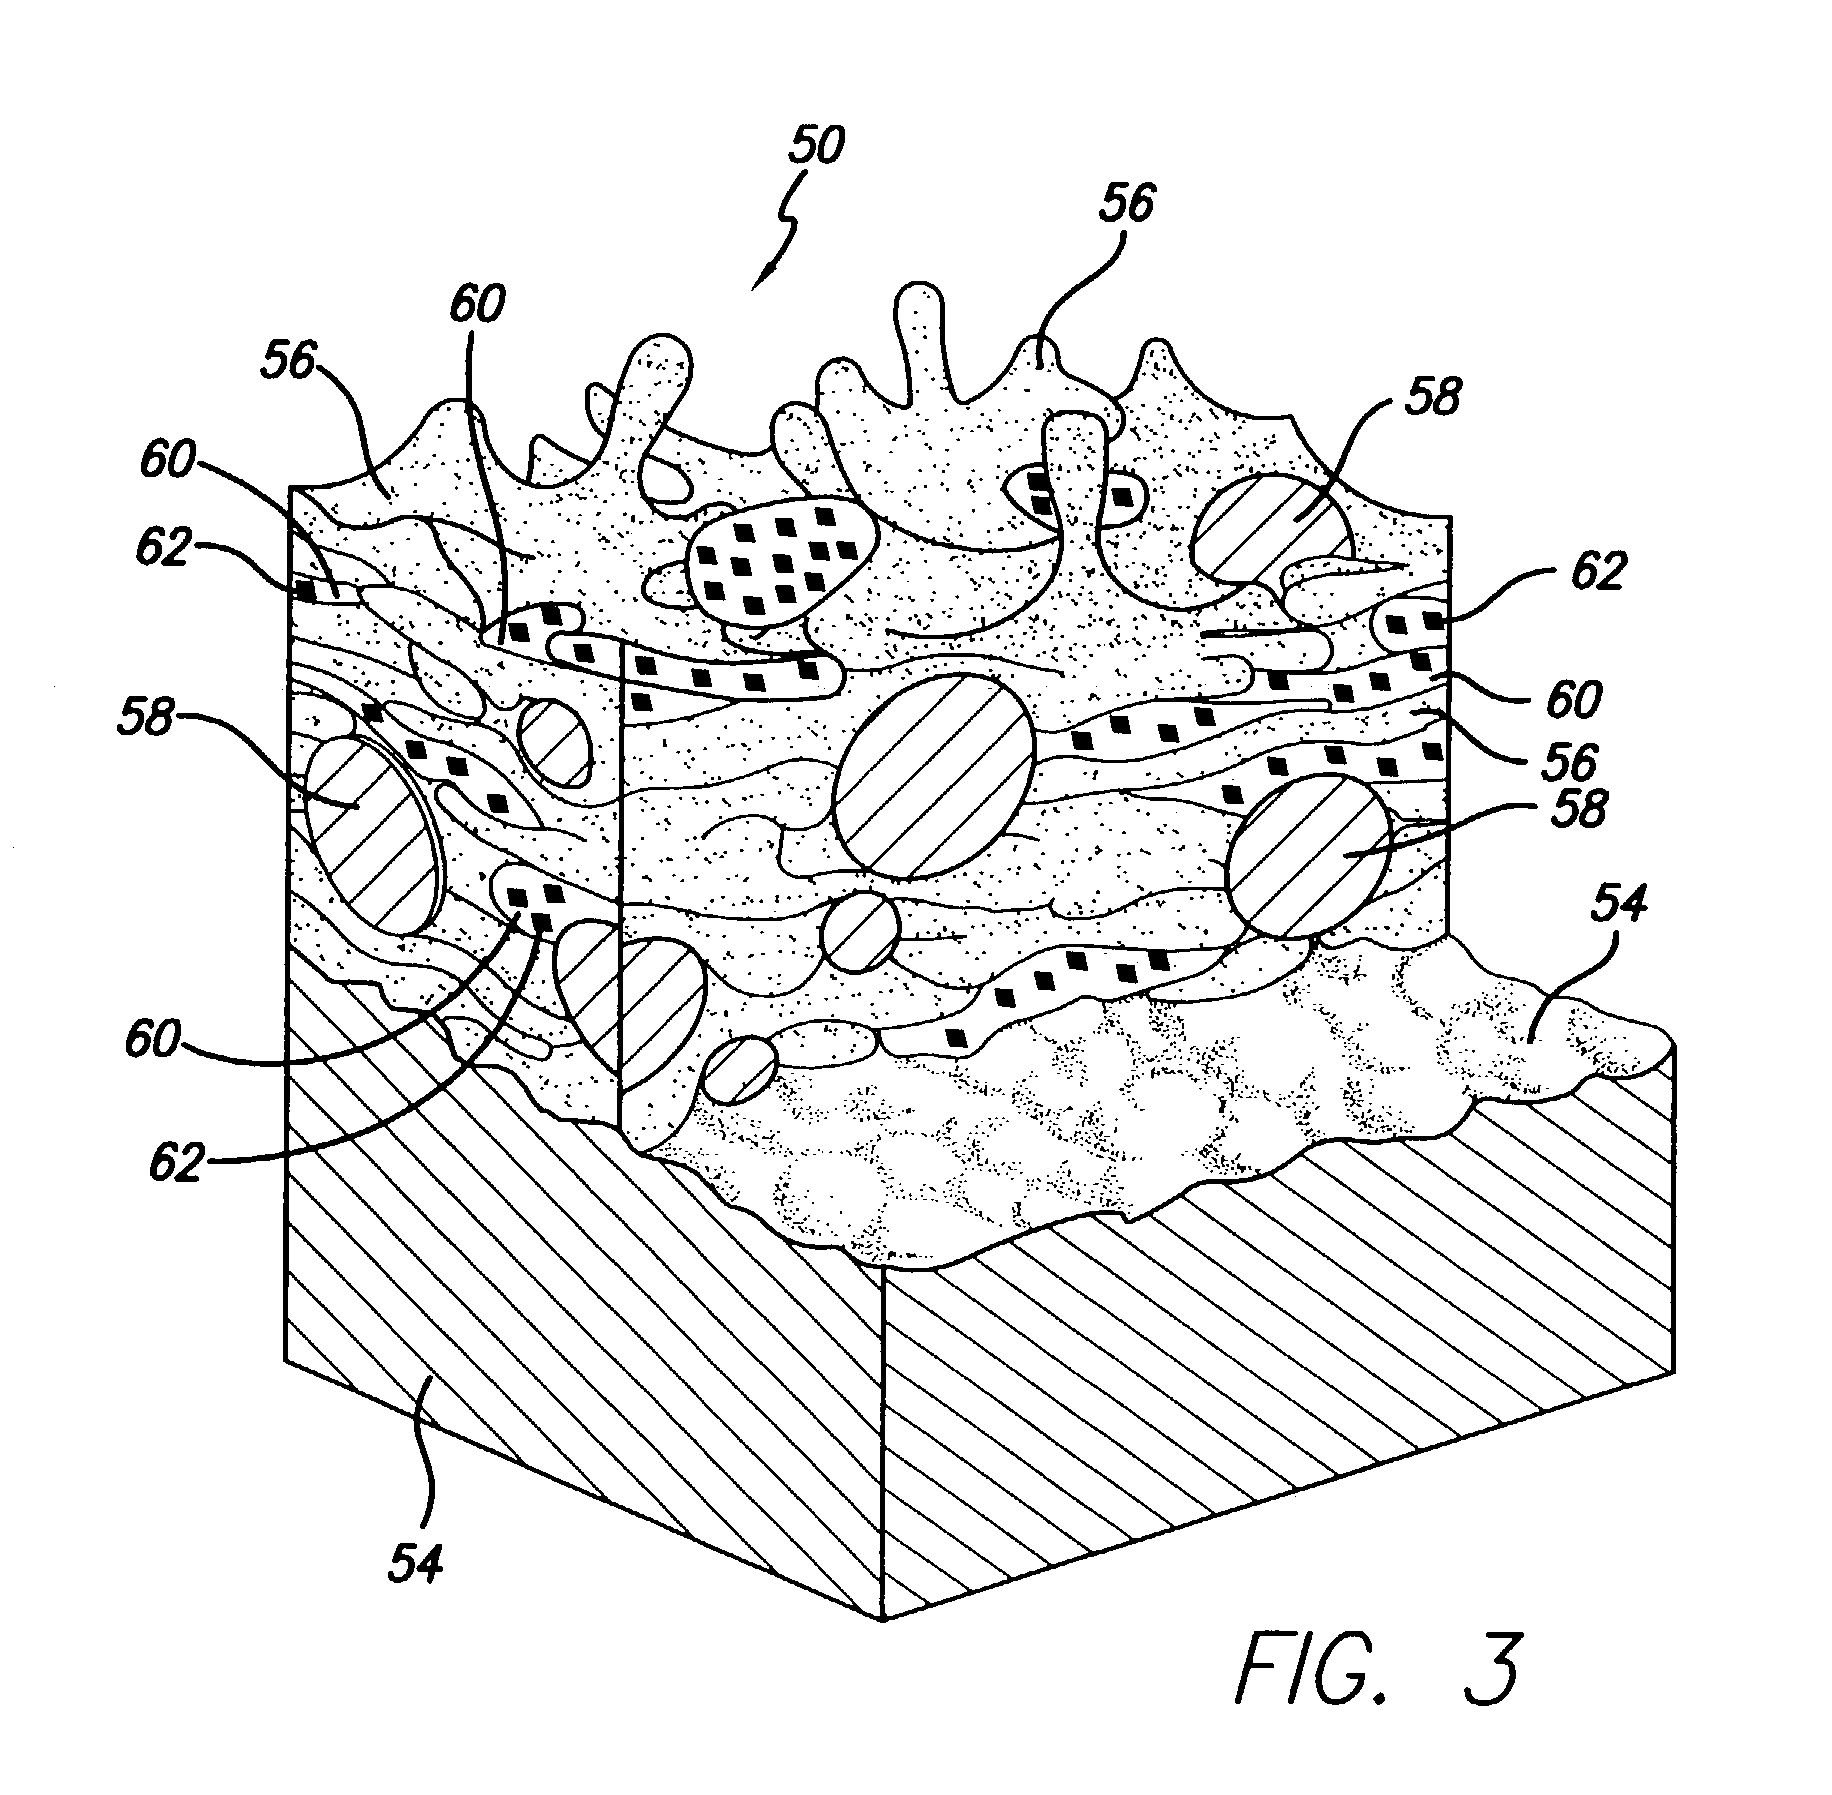 Spray processing of porous medical devices